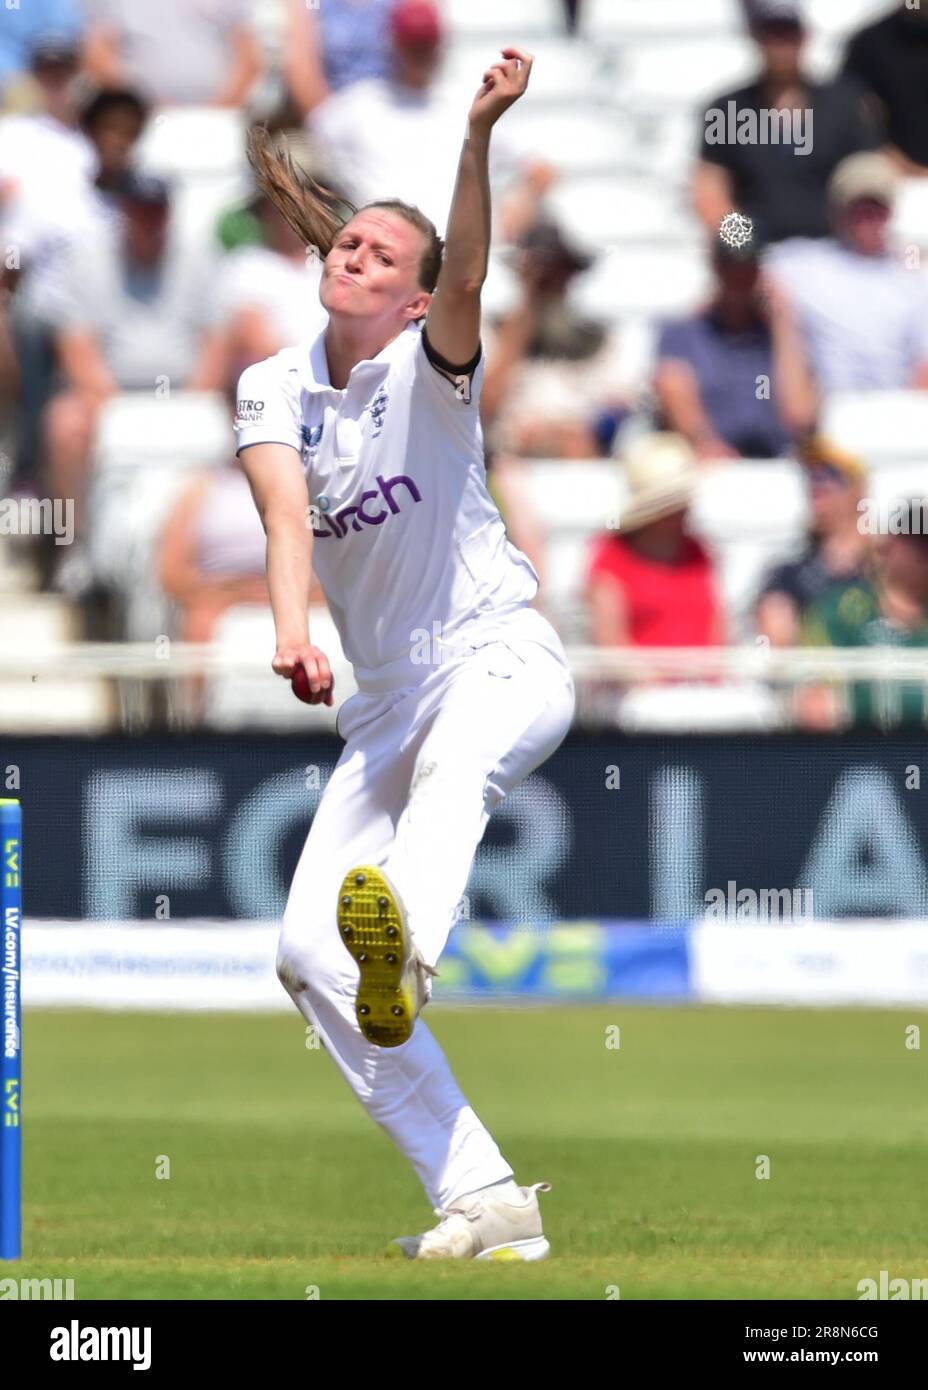 Nottingham UK. 22 June 2023. England Ladies v Australia Ladies in the Ashes Cricket Test Match.   Lauren Filer (England) bowling.  Picture: Mark Dunn/Alamy Live News, Stock Photo